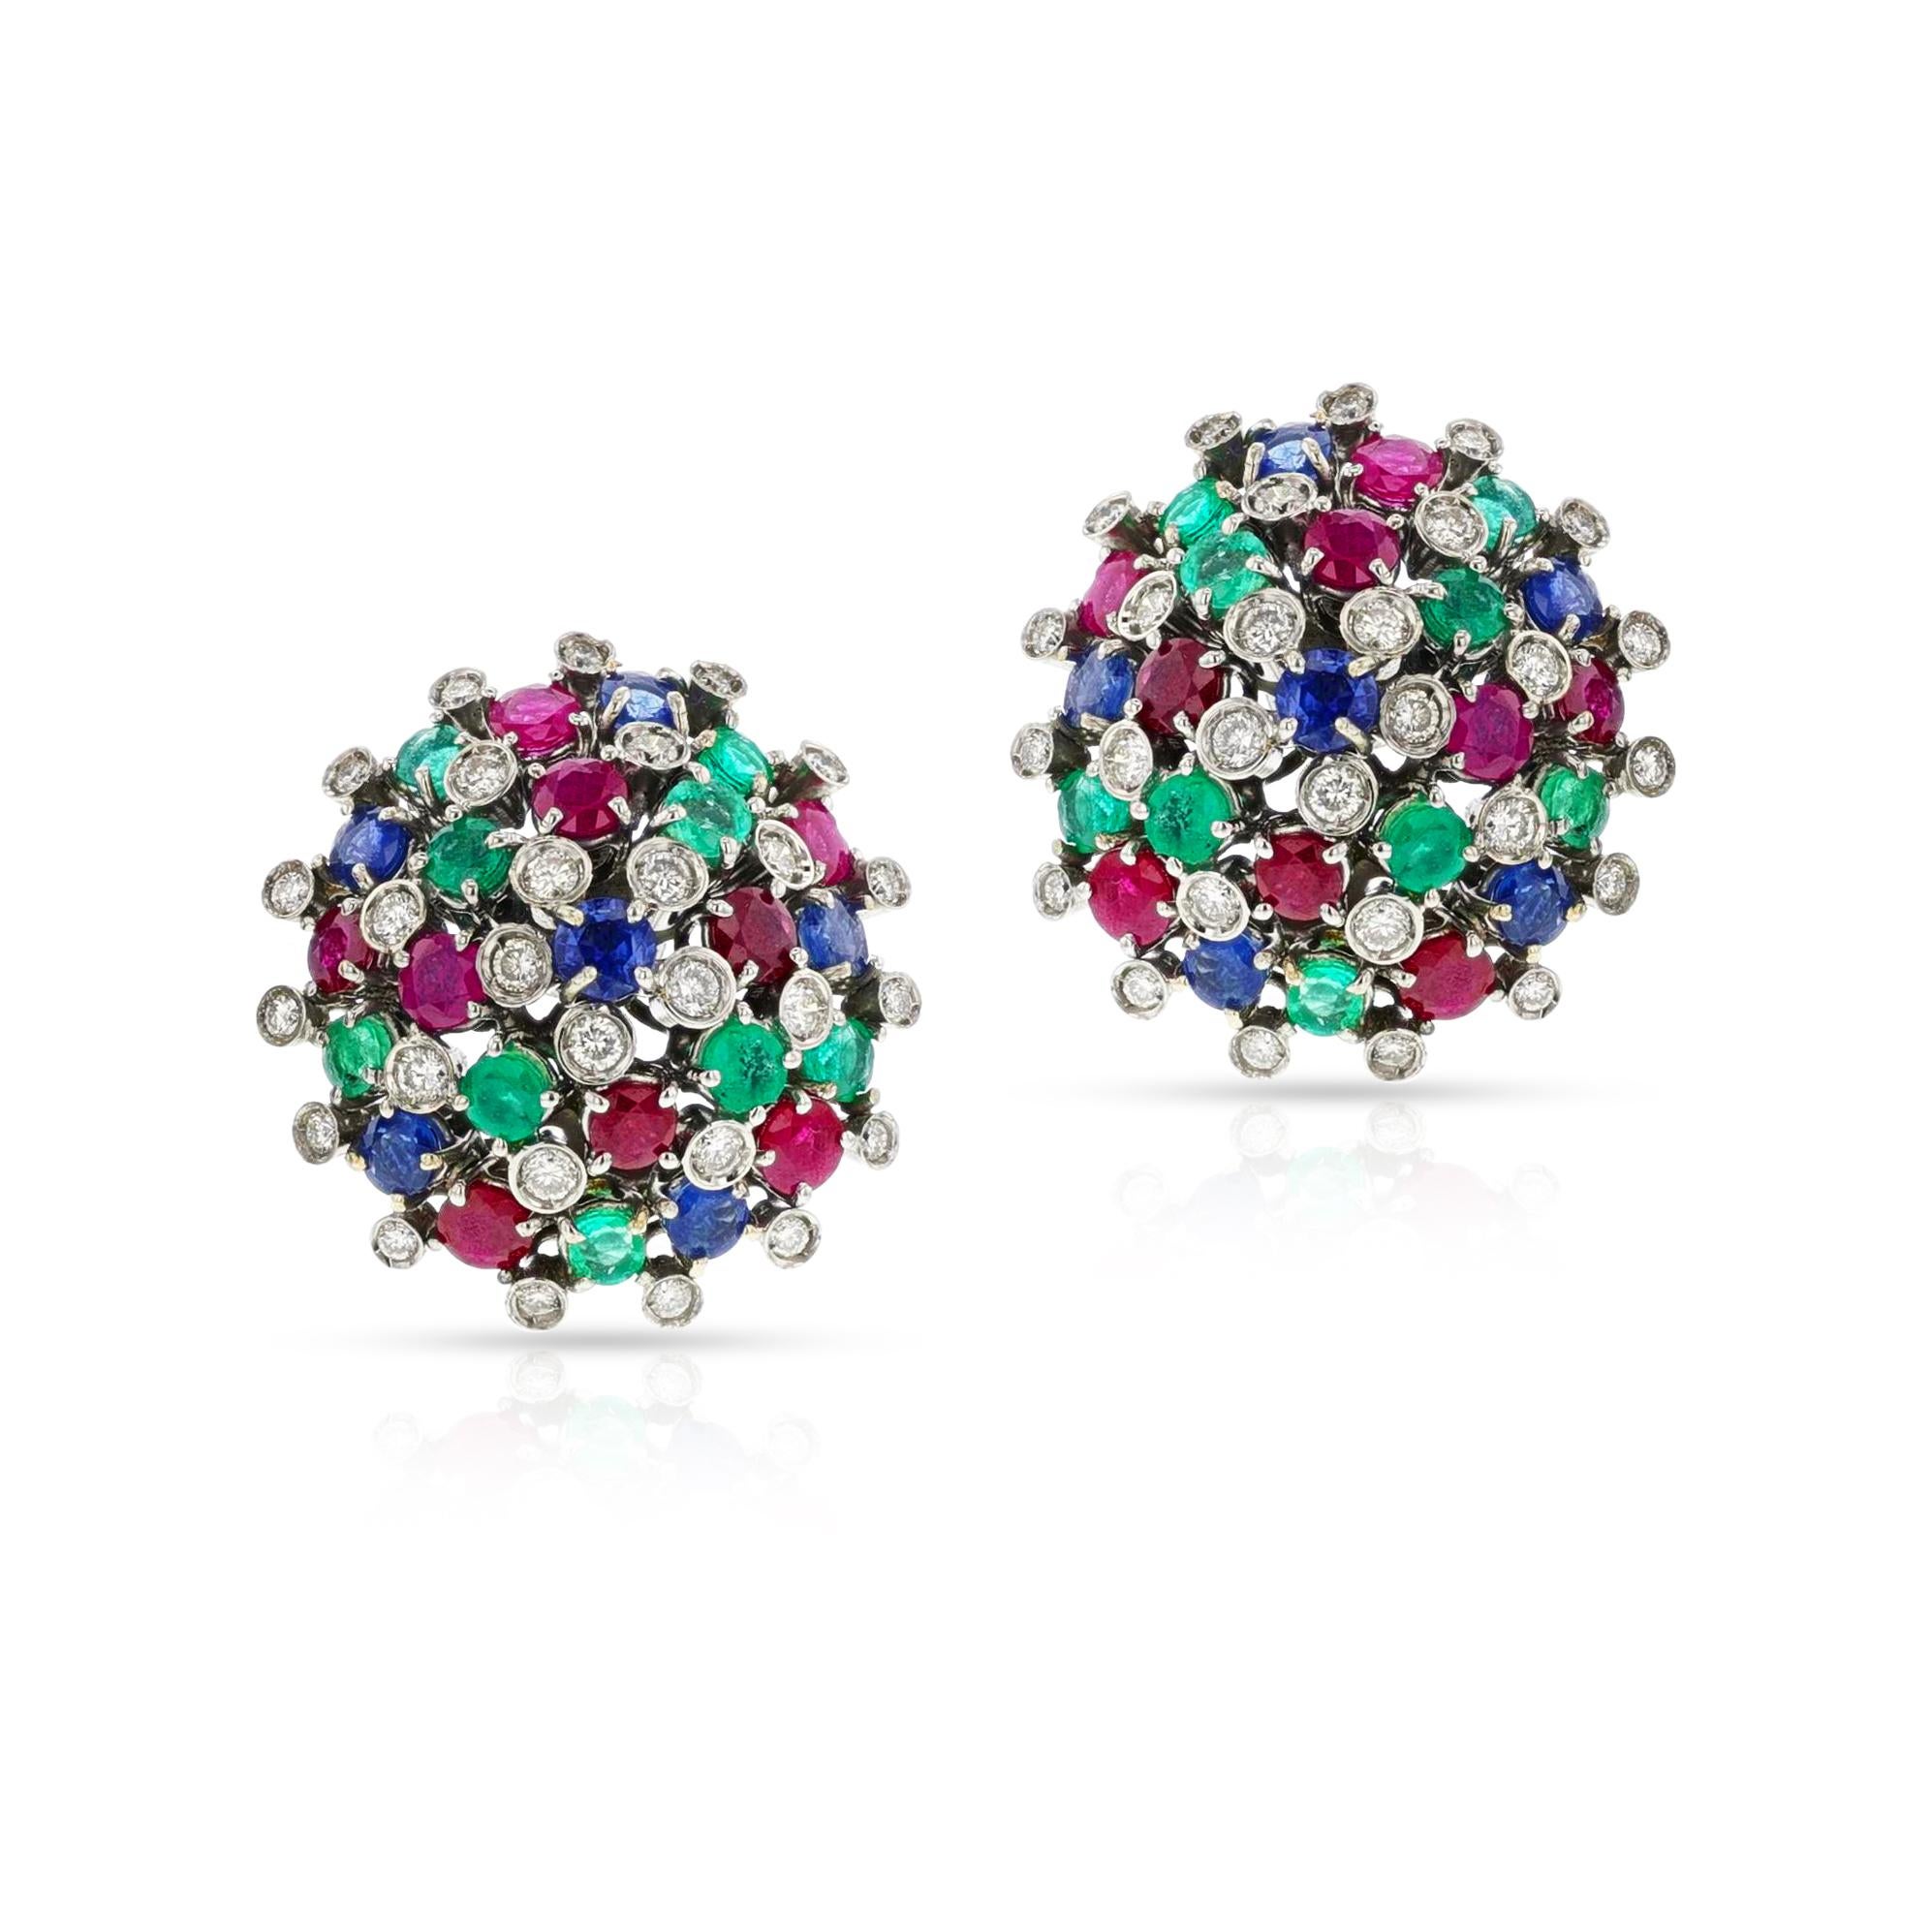 This timeless set of earrings offers the perfect mix of classic elegance and modern flair. Expertly crafted in 18k White Gold, they feature round cut rubies, sapphires, emeralds, and diamonds, each weighing 30.64 grams and measuring 1.2